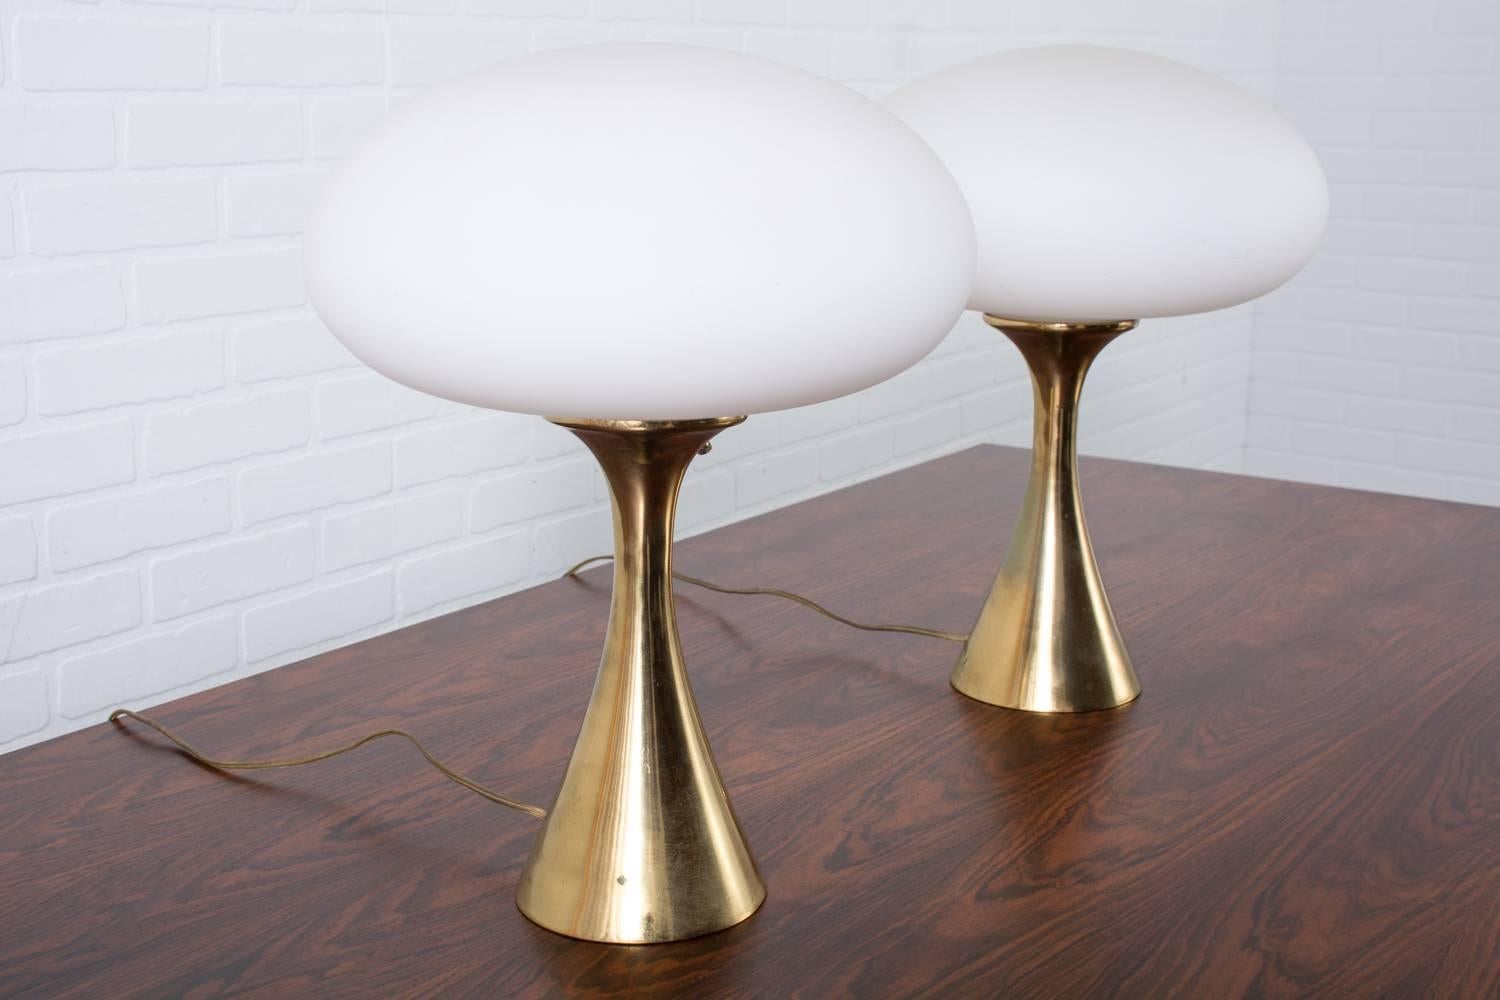 These Mid-Century Modern lamps are by Laurel Lamp Company, USA, 1960s. They feature handblown Italian frosted glass shades and brass tulip bases.